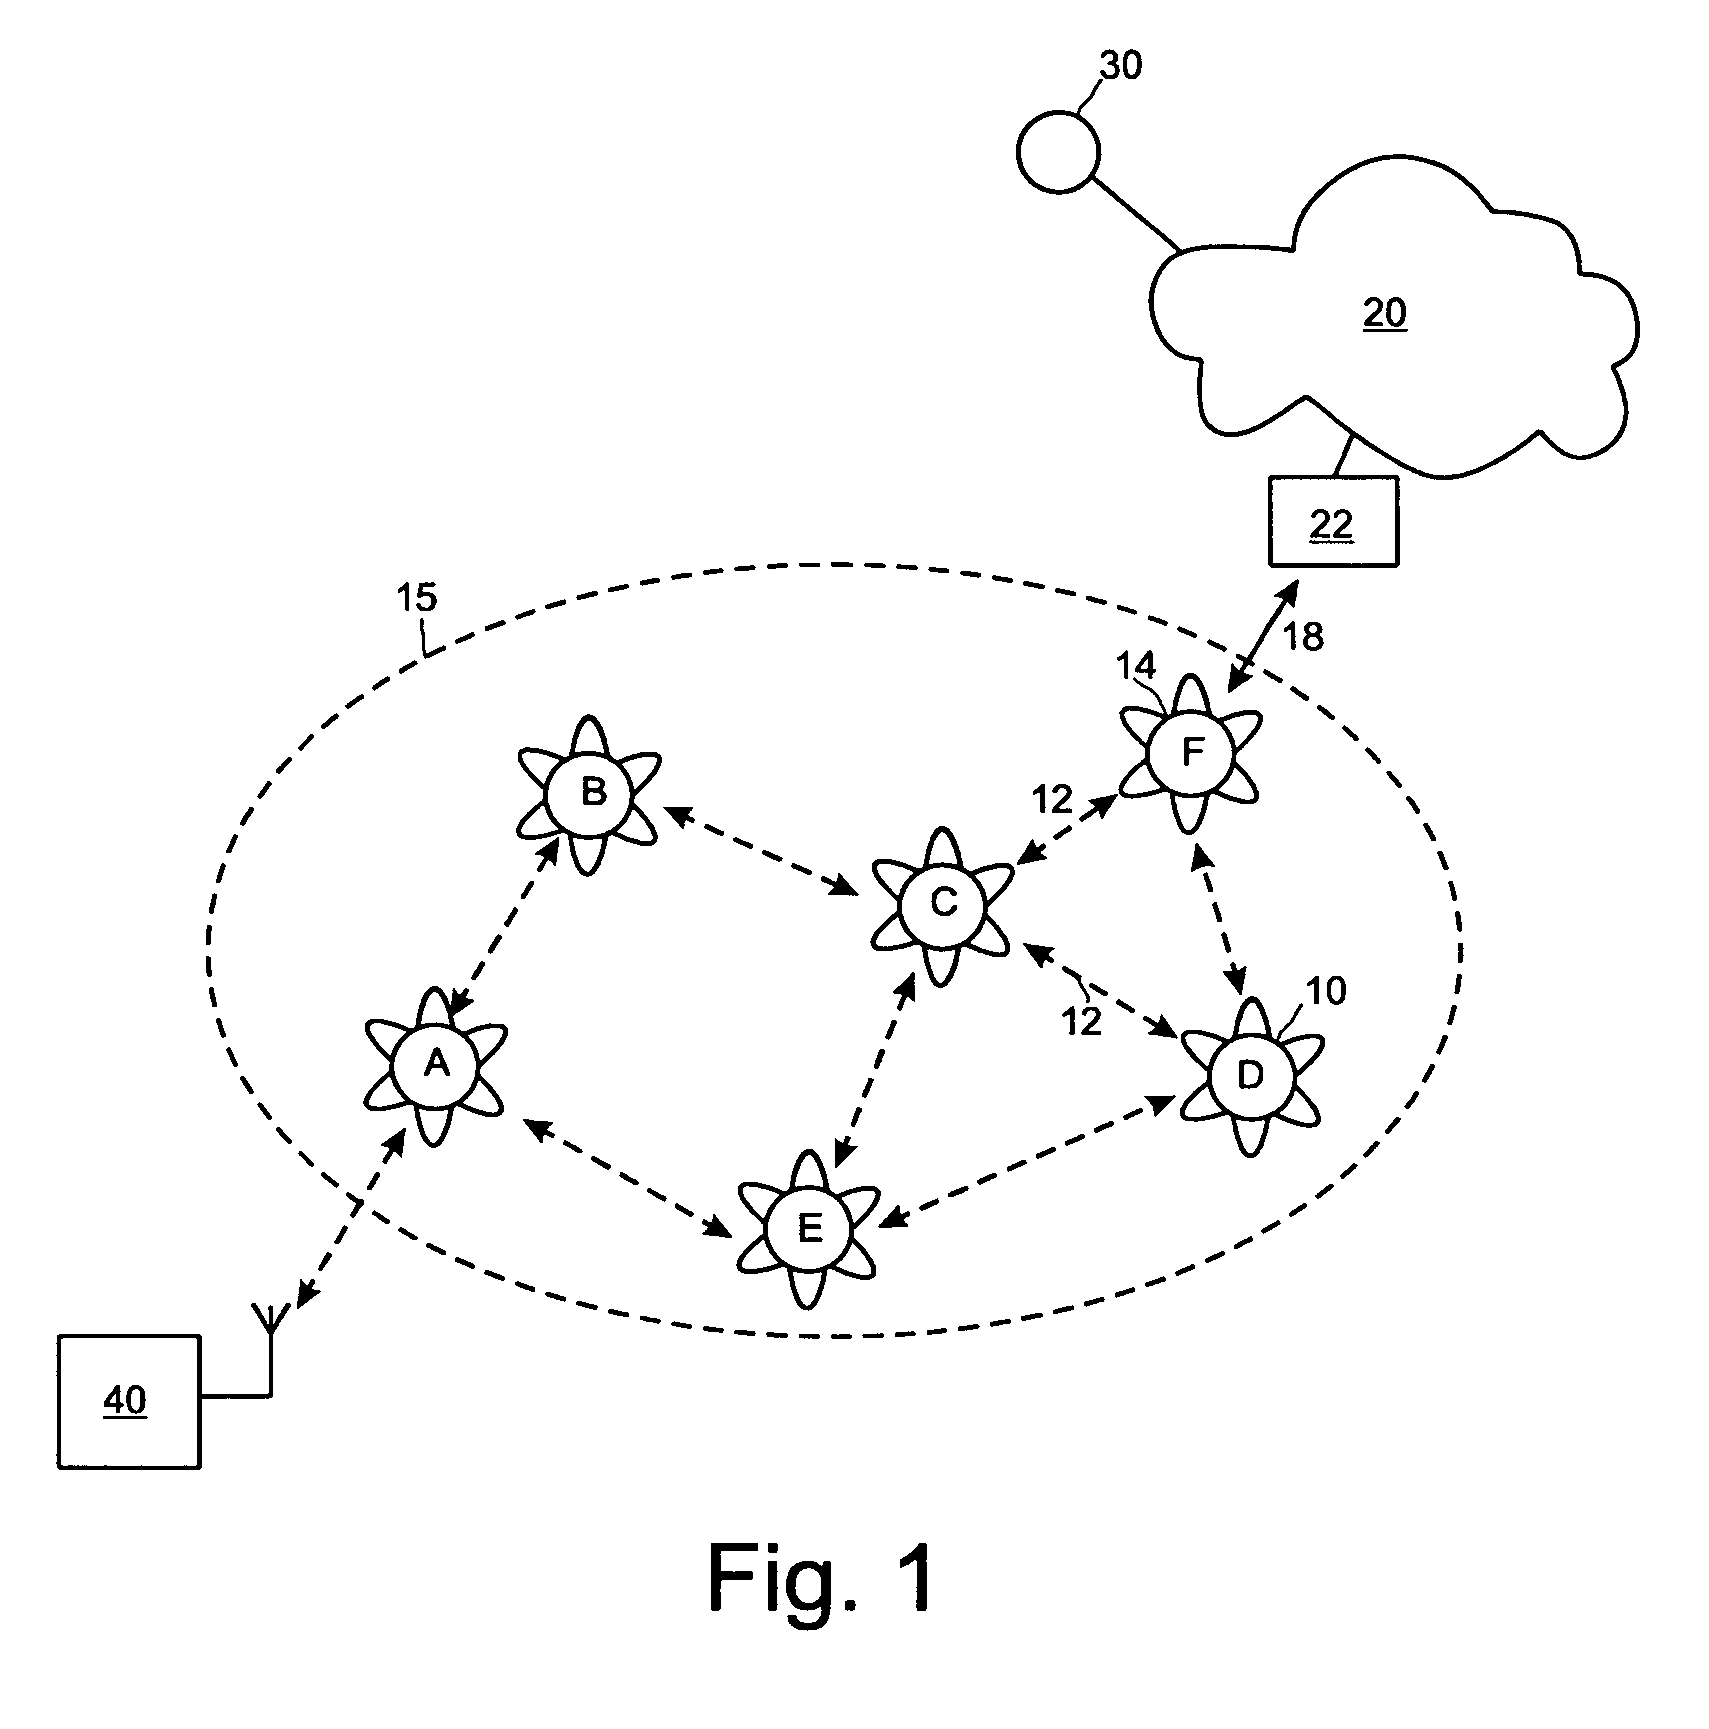 Routing of protocol data units within a communication network